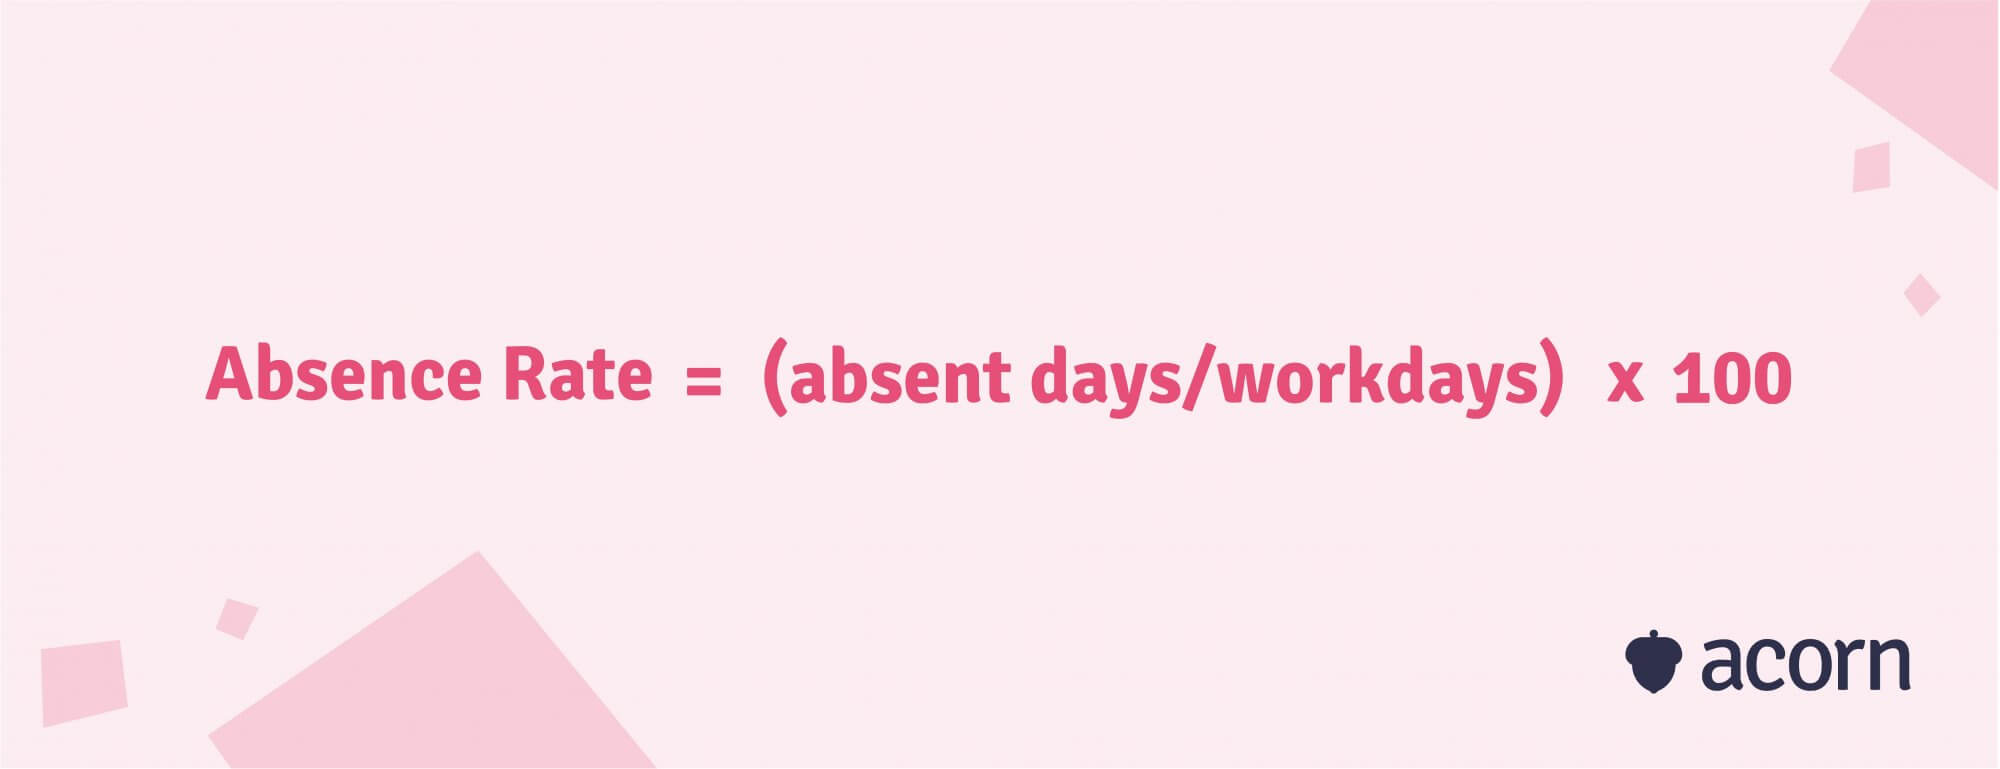 absence rate formula = (absent days:workdays) x 100